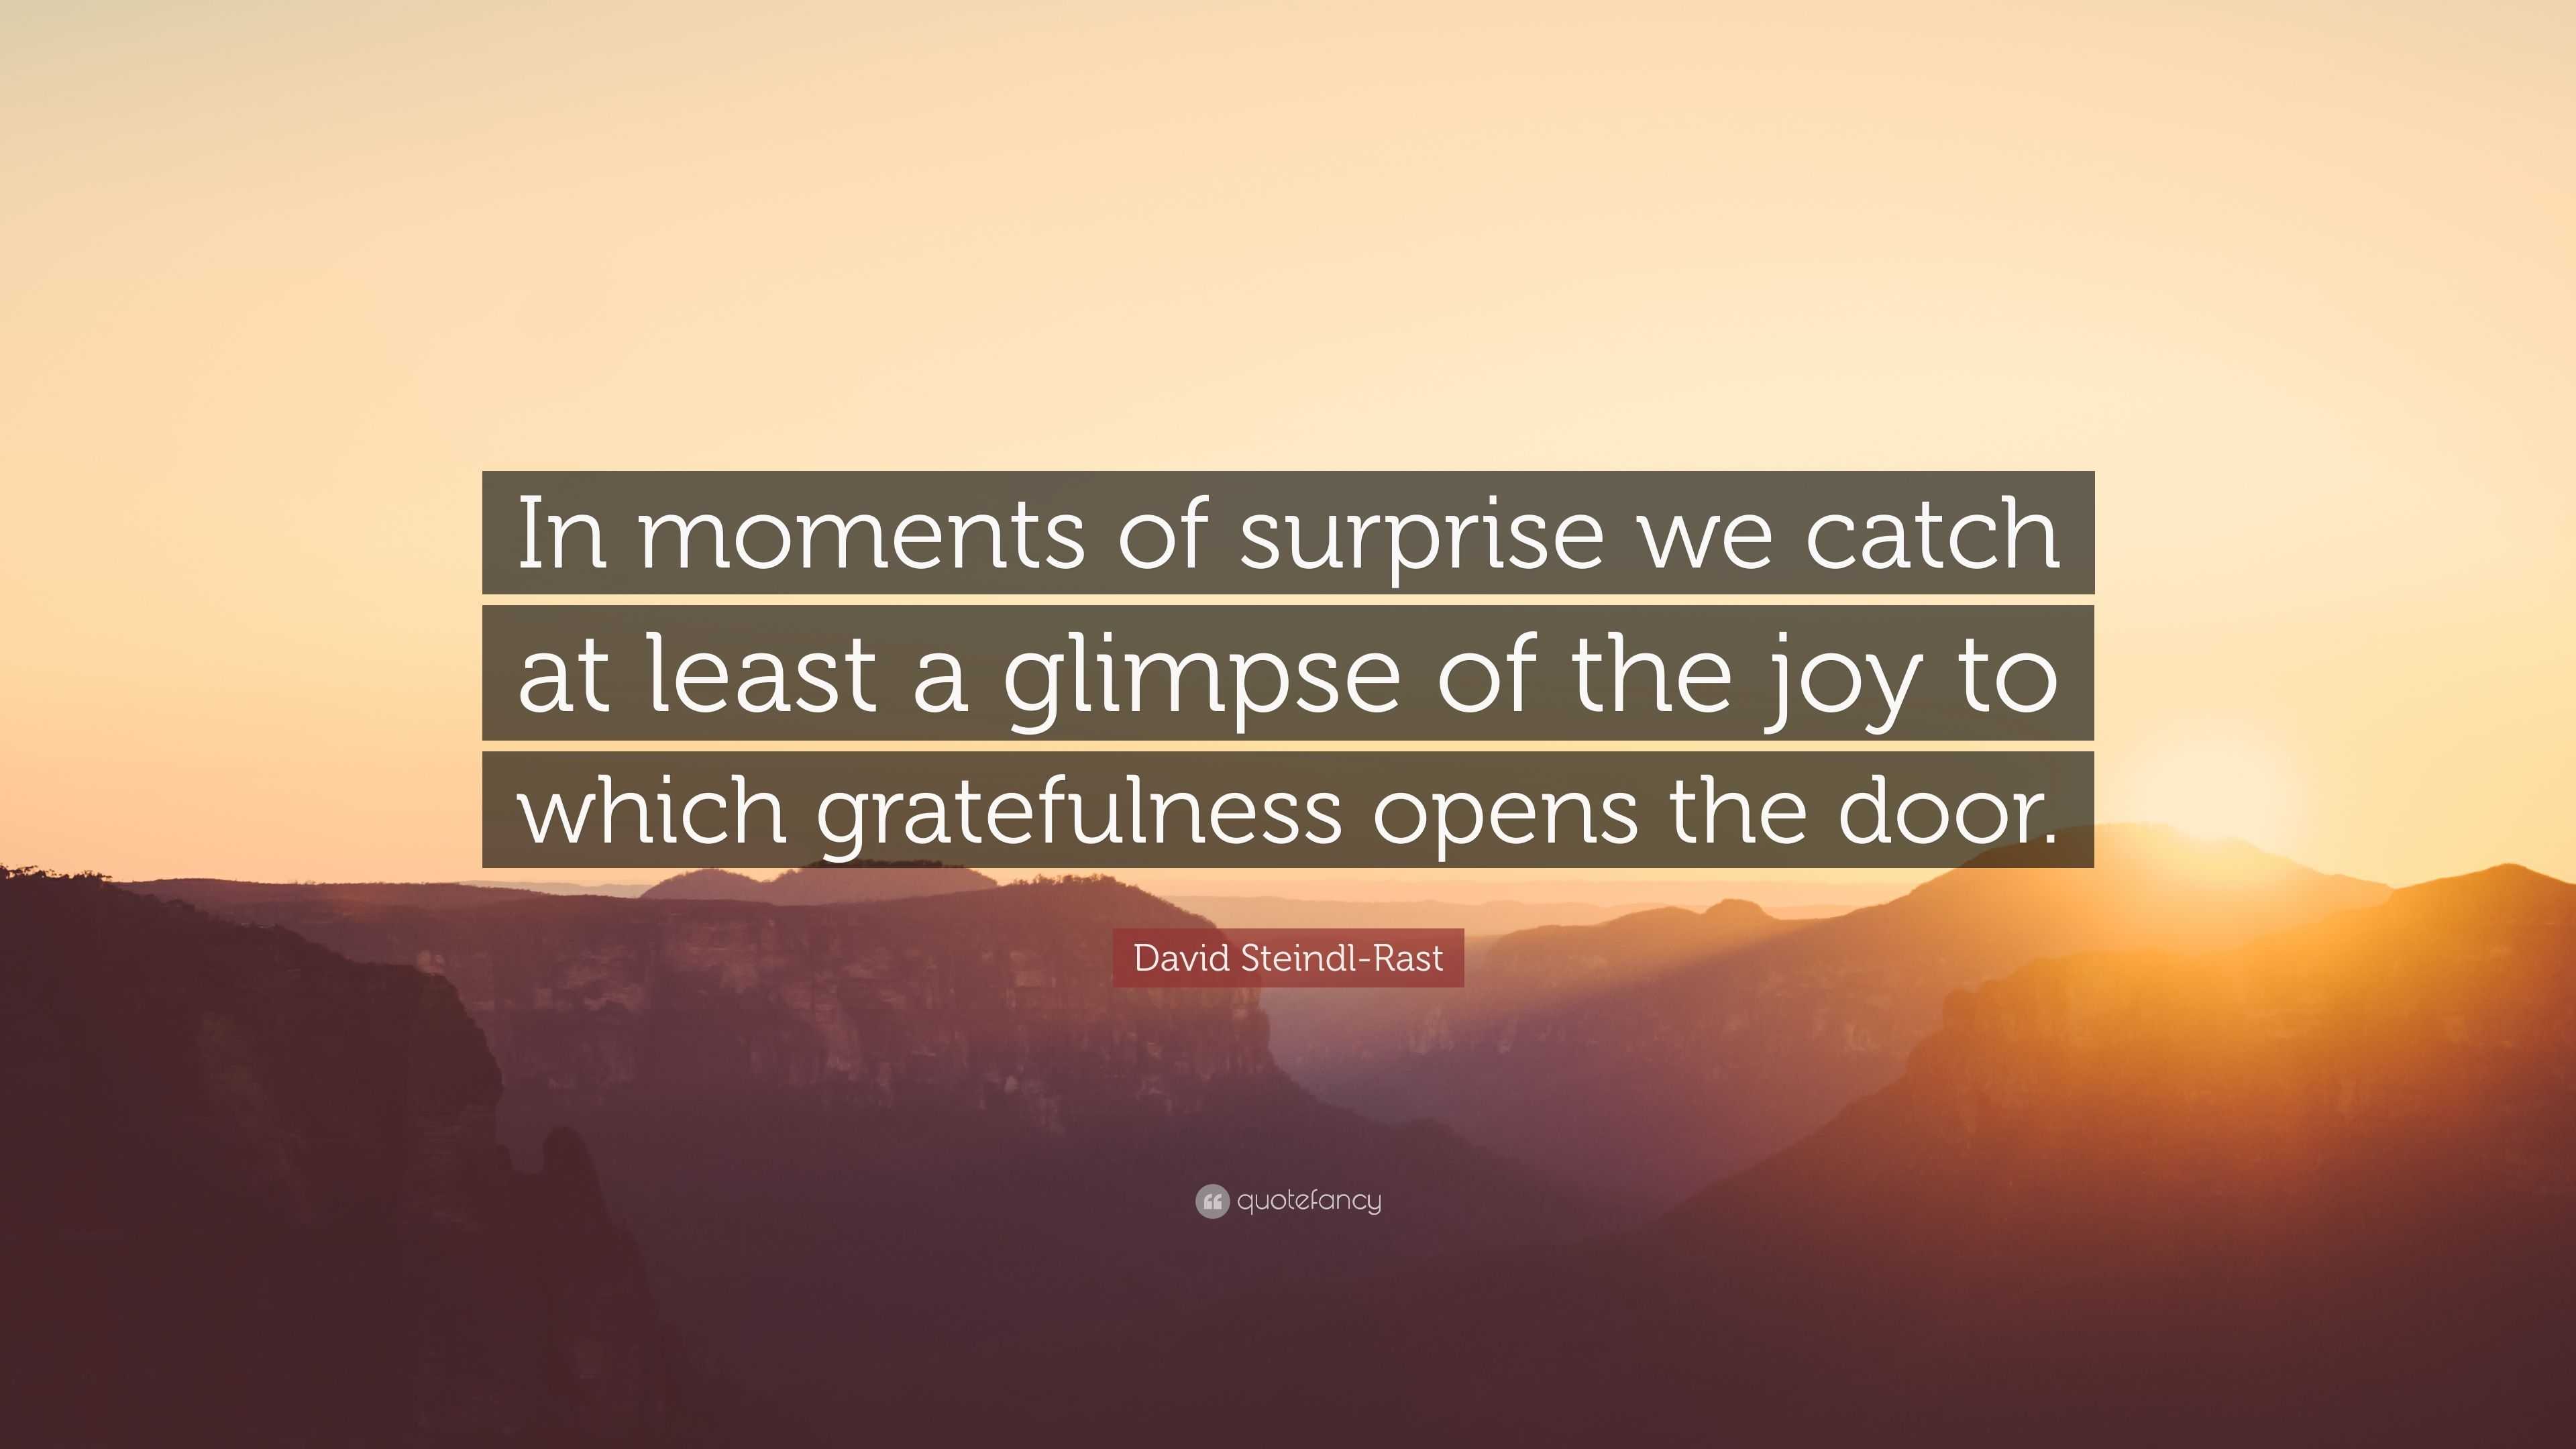 David Steindl Rast Quote In Moments Of Surprise We Catch At Least A Glimpse Of The Joy To Which Gratefulness Opens The Door 7 Wallpapers Quotefancy